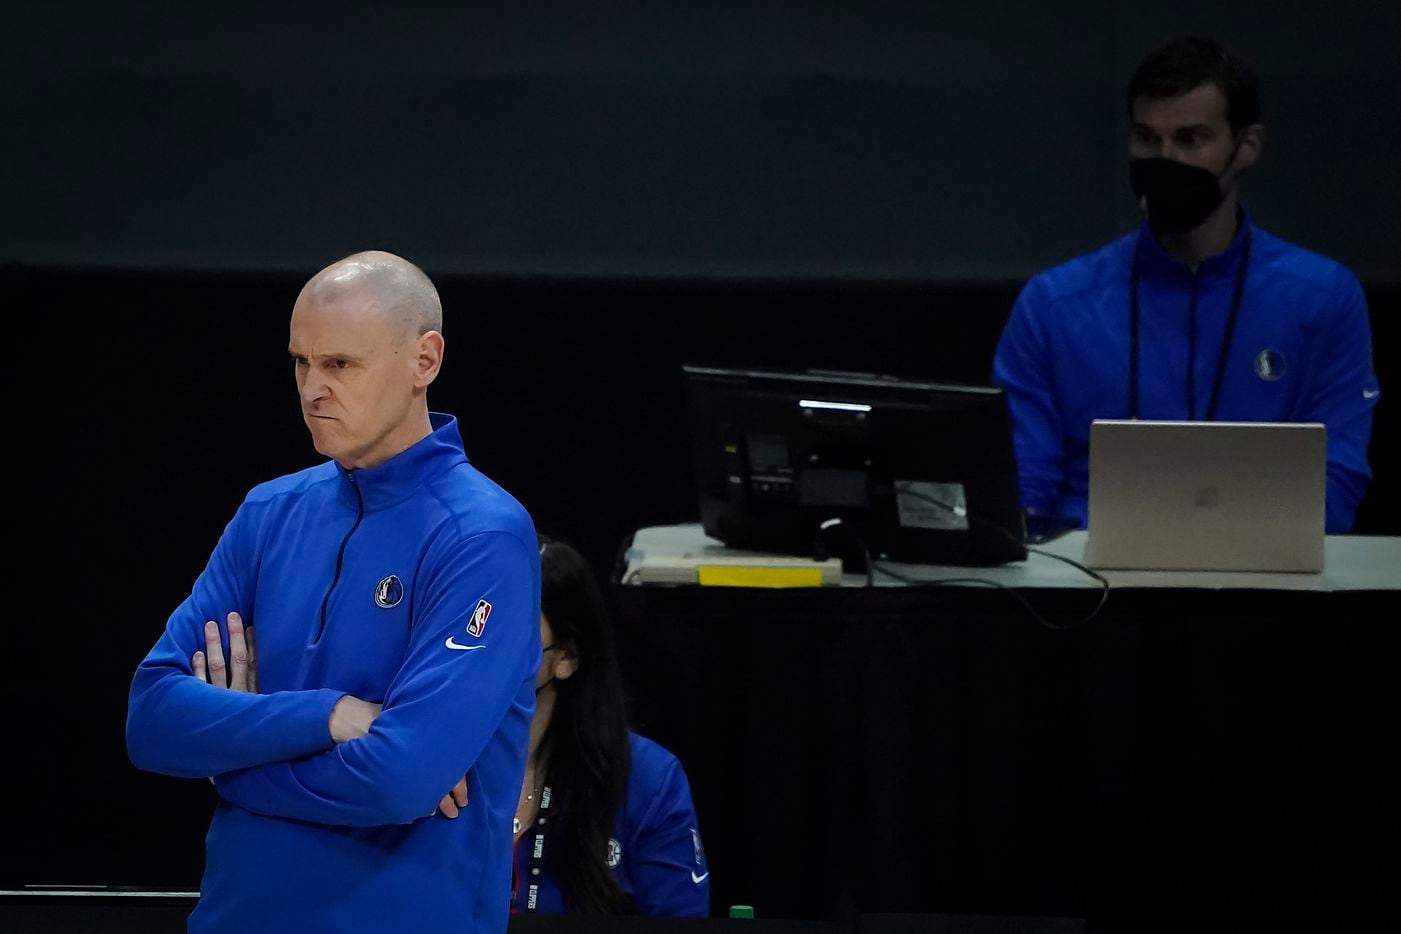 Dallas Mavericks head coach Rick Carlisle watches from the sidelines during the first half of an NBA playoff basketball game against the LA Clippers at Staples Center on Tuesday, May 25, 2021, in Los Angeles.